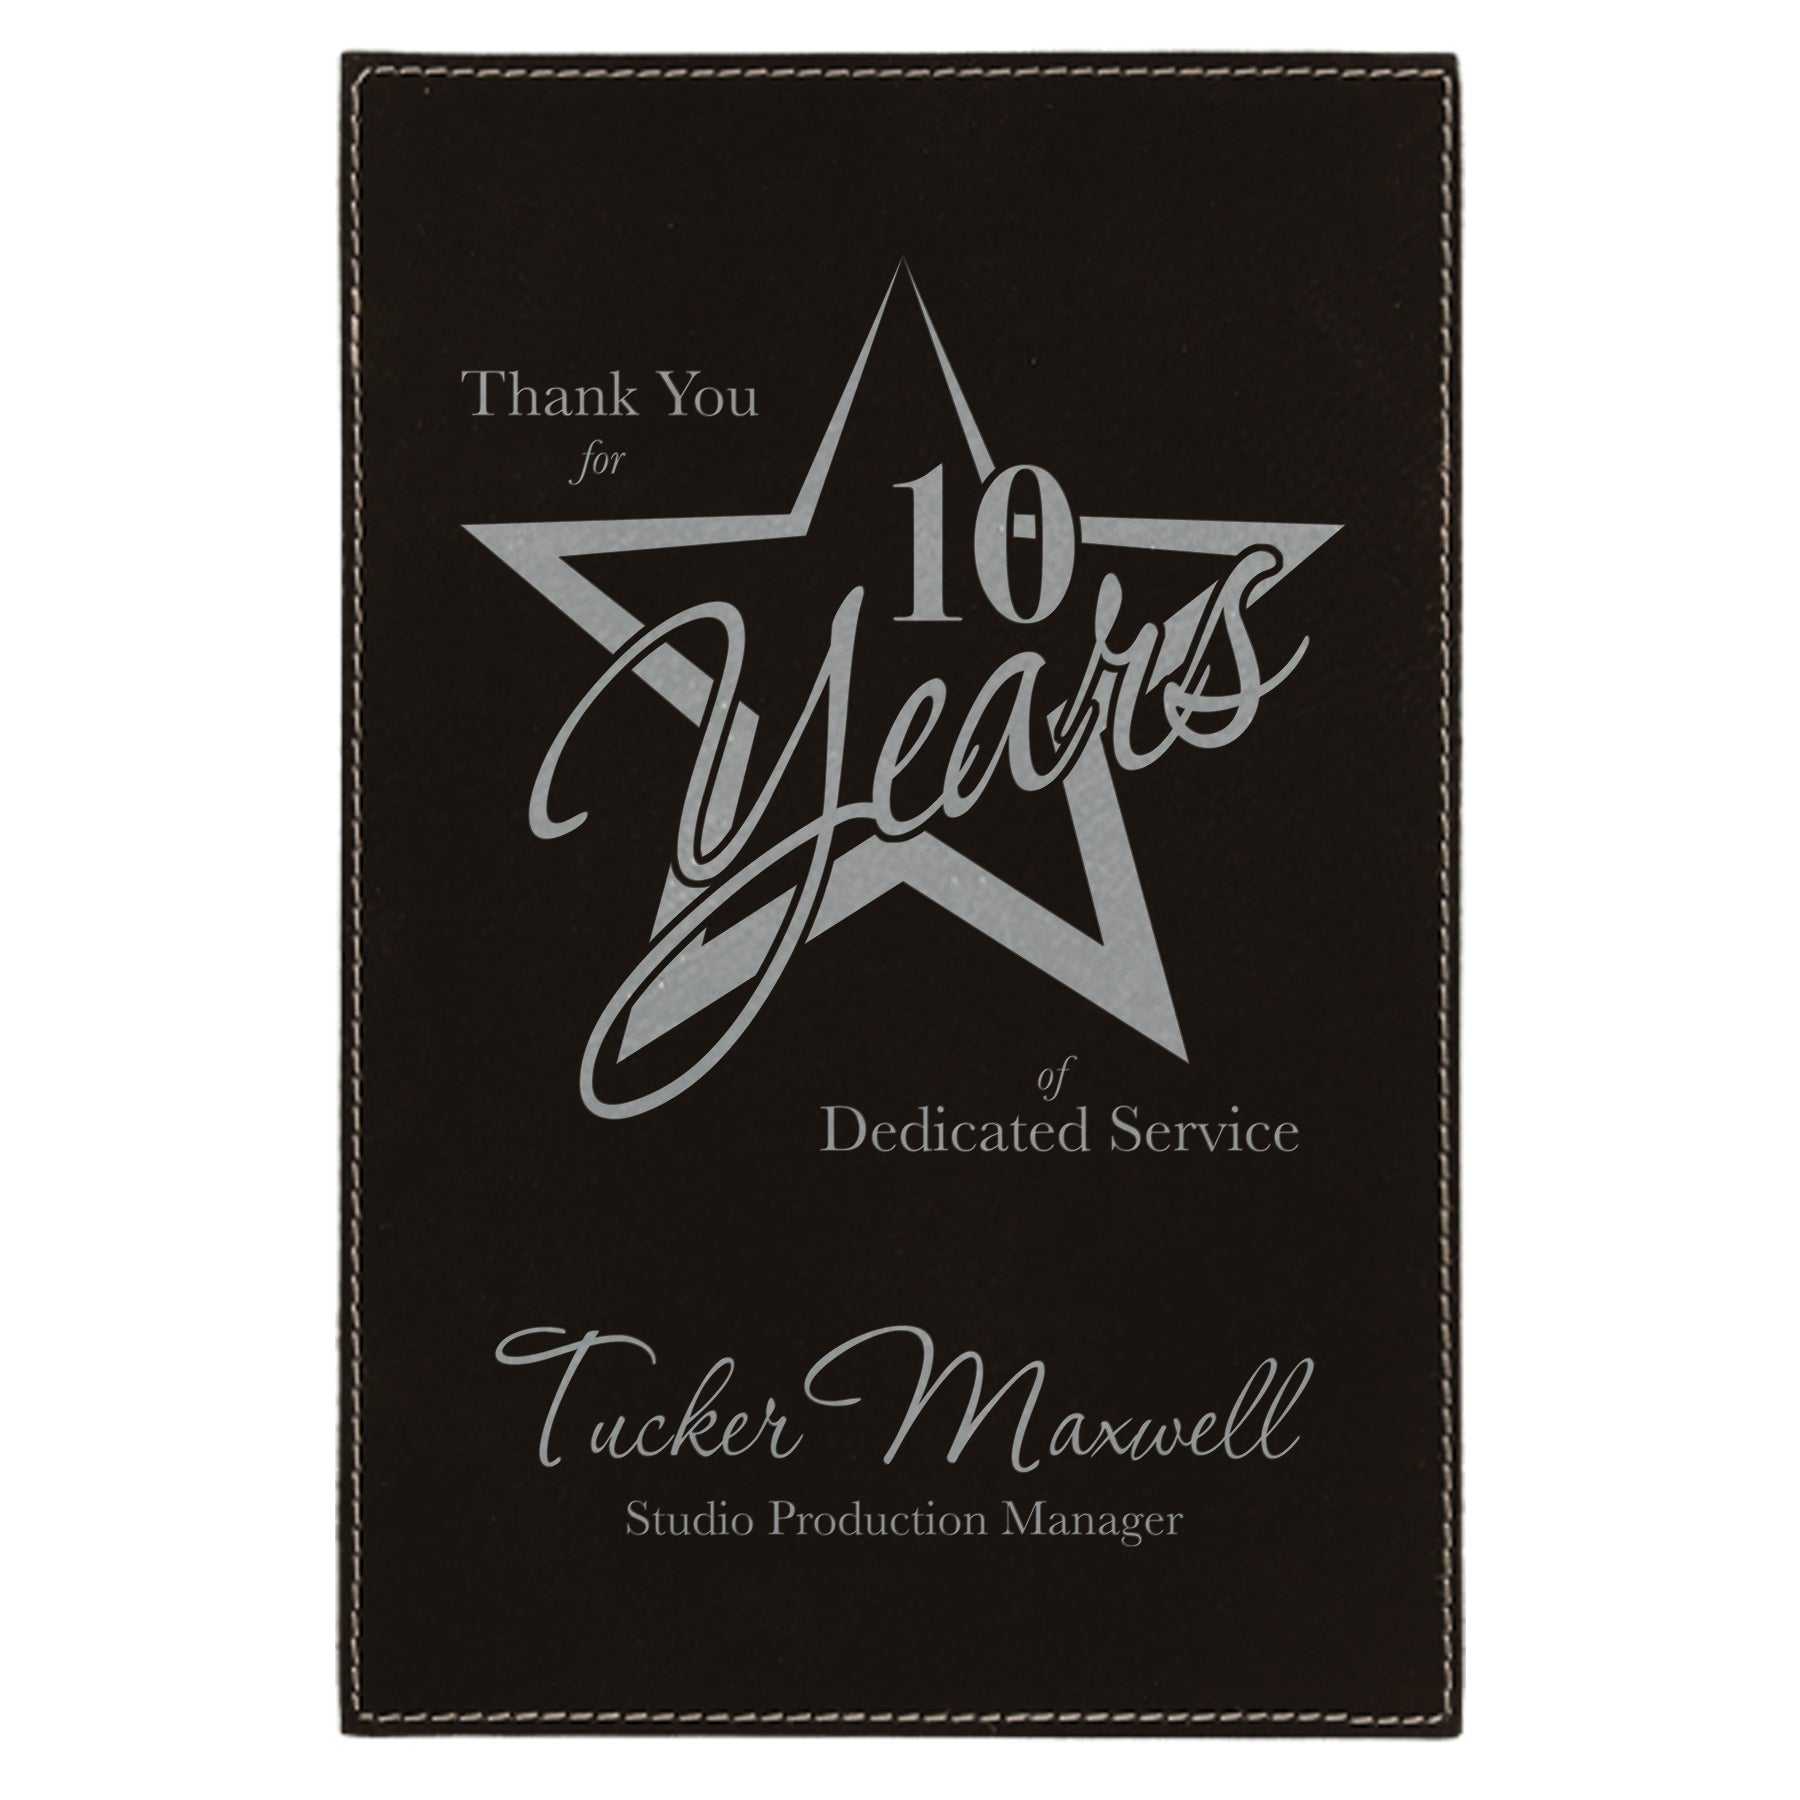 Plaque Plate, Laserable Leatherette, 6" x 8", Laser Engraved Plaque Plate Craftworks NW Black/Silver 